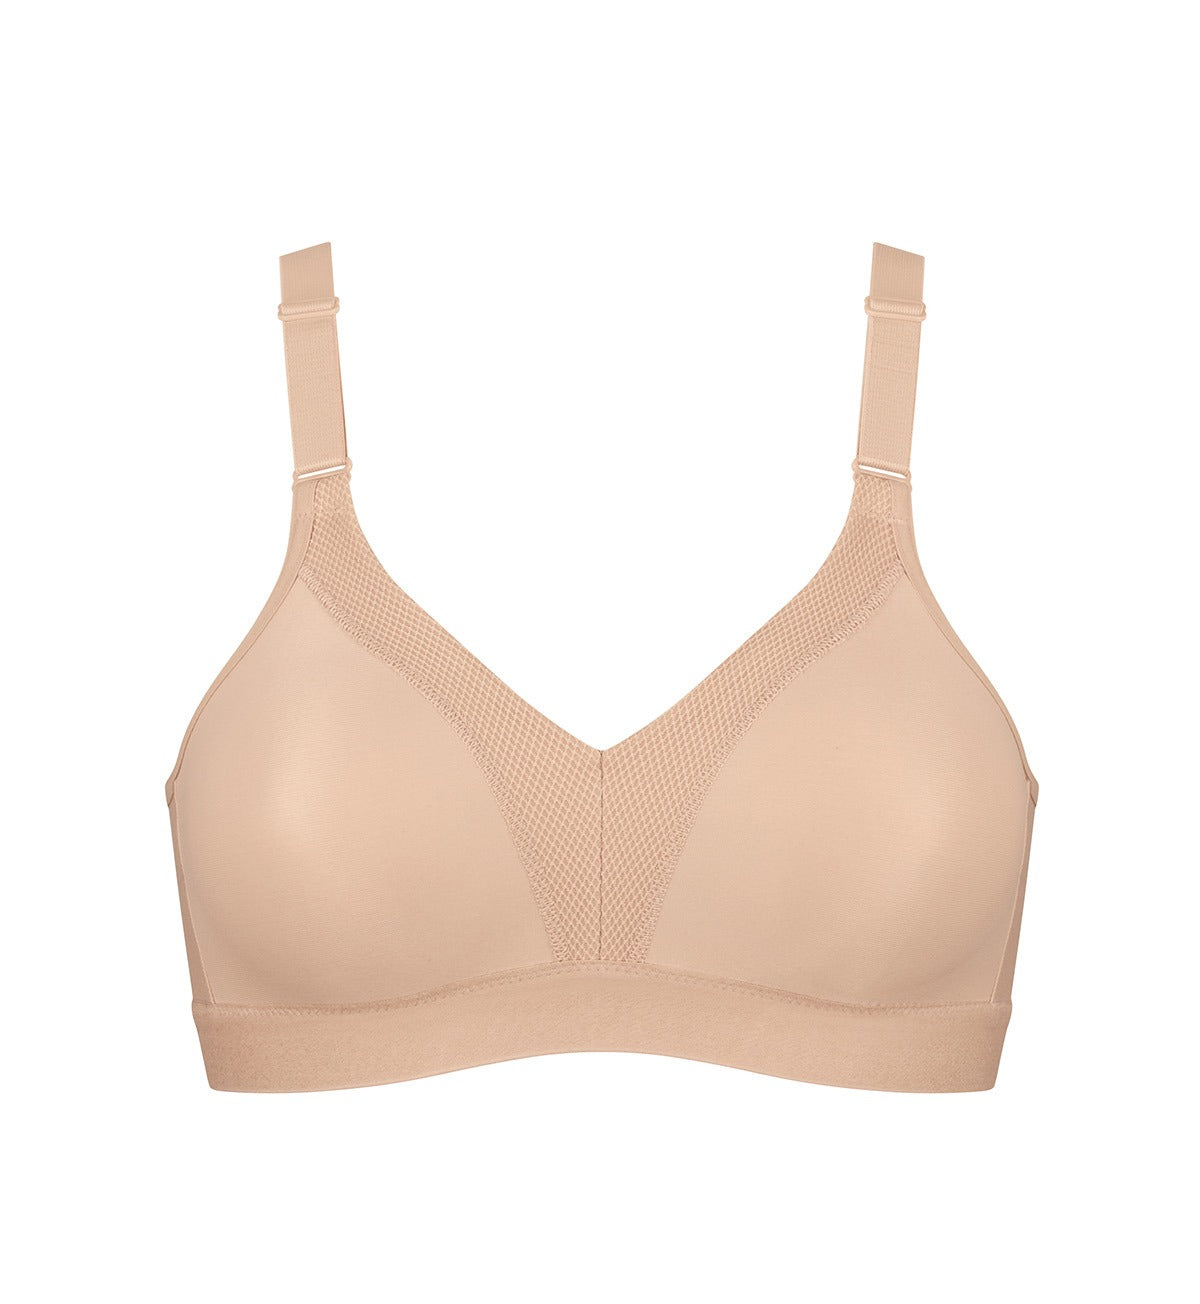 Spanx Mama contouring short in beige-Neutral